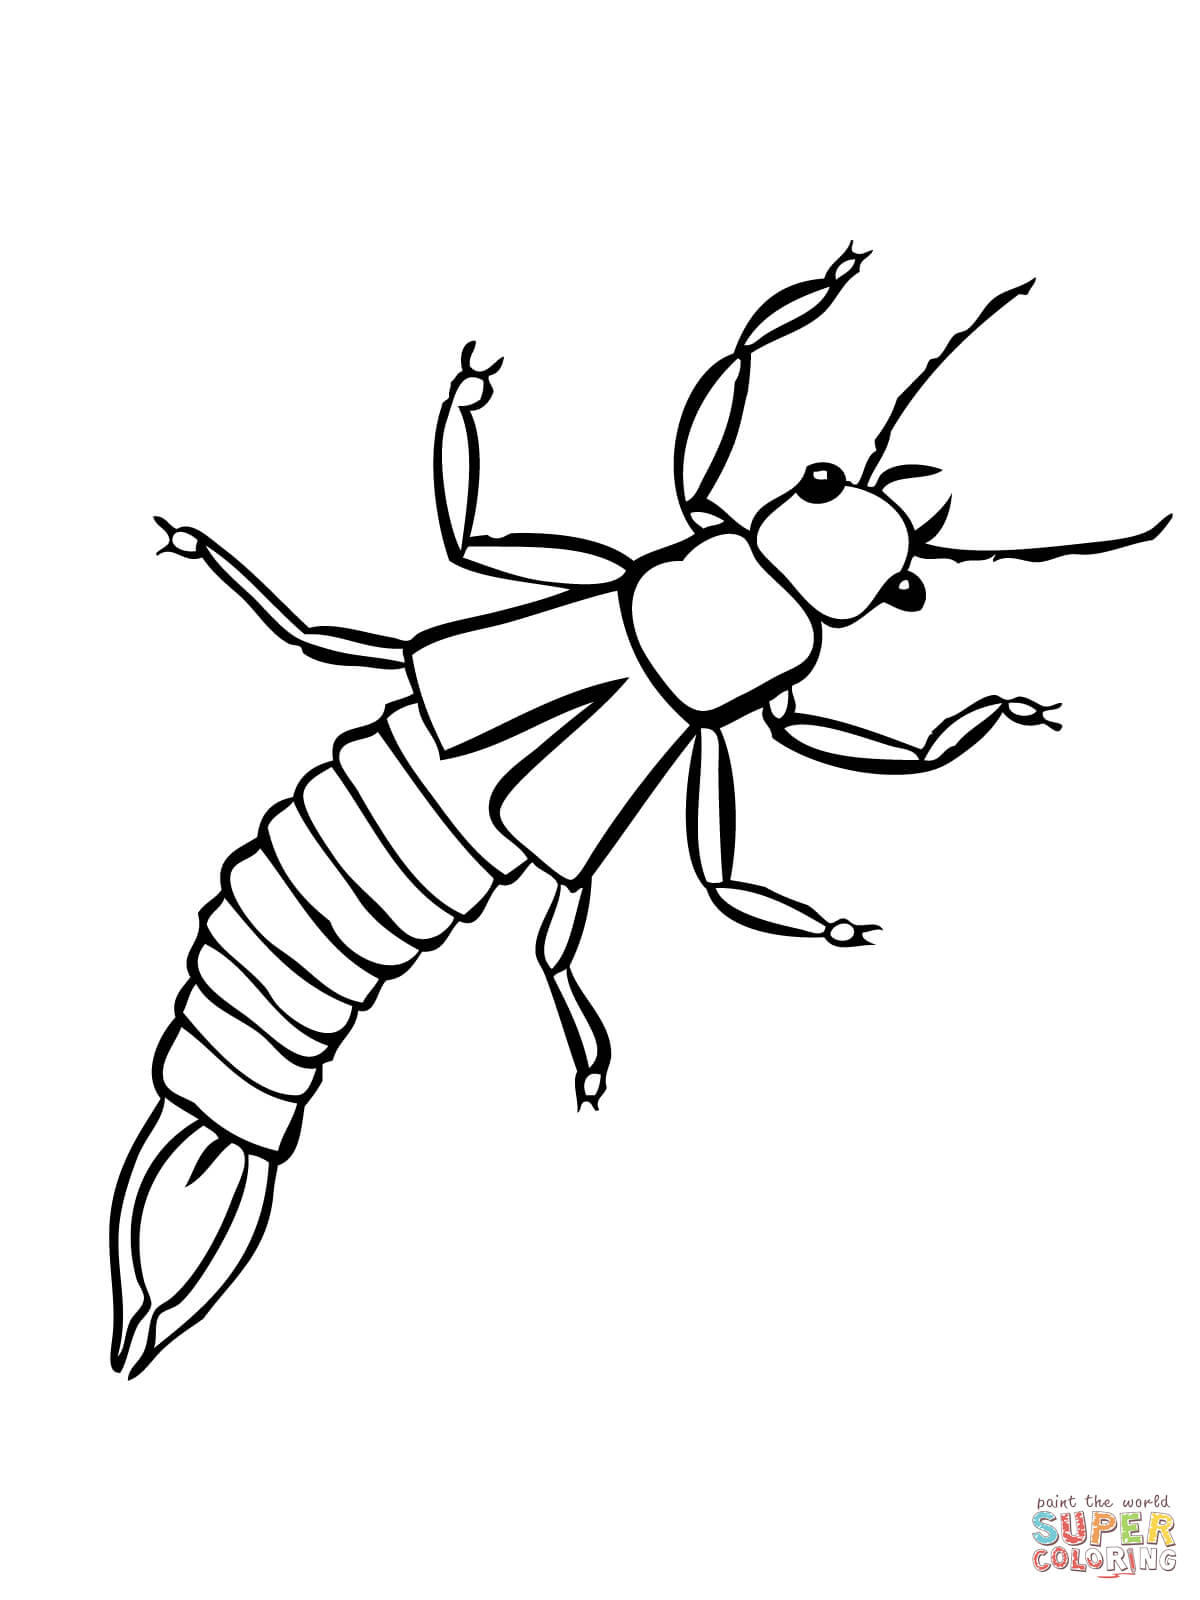 Earwig insect coloring page free printable coloring pages